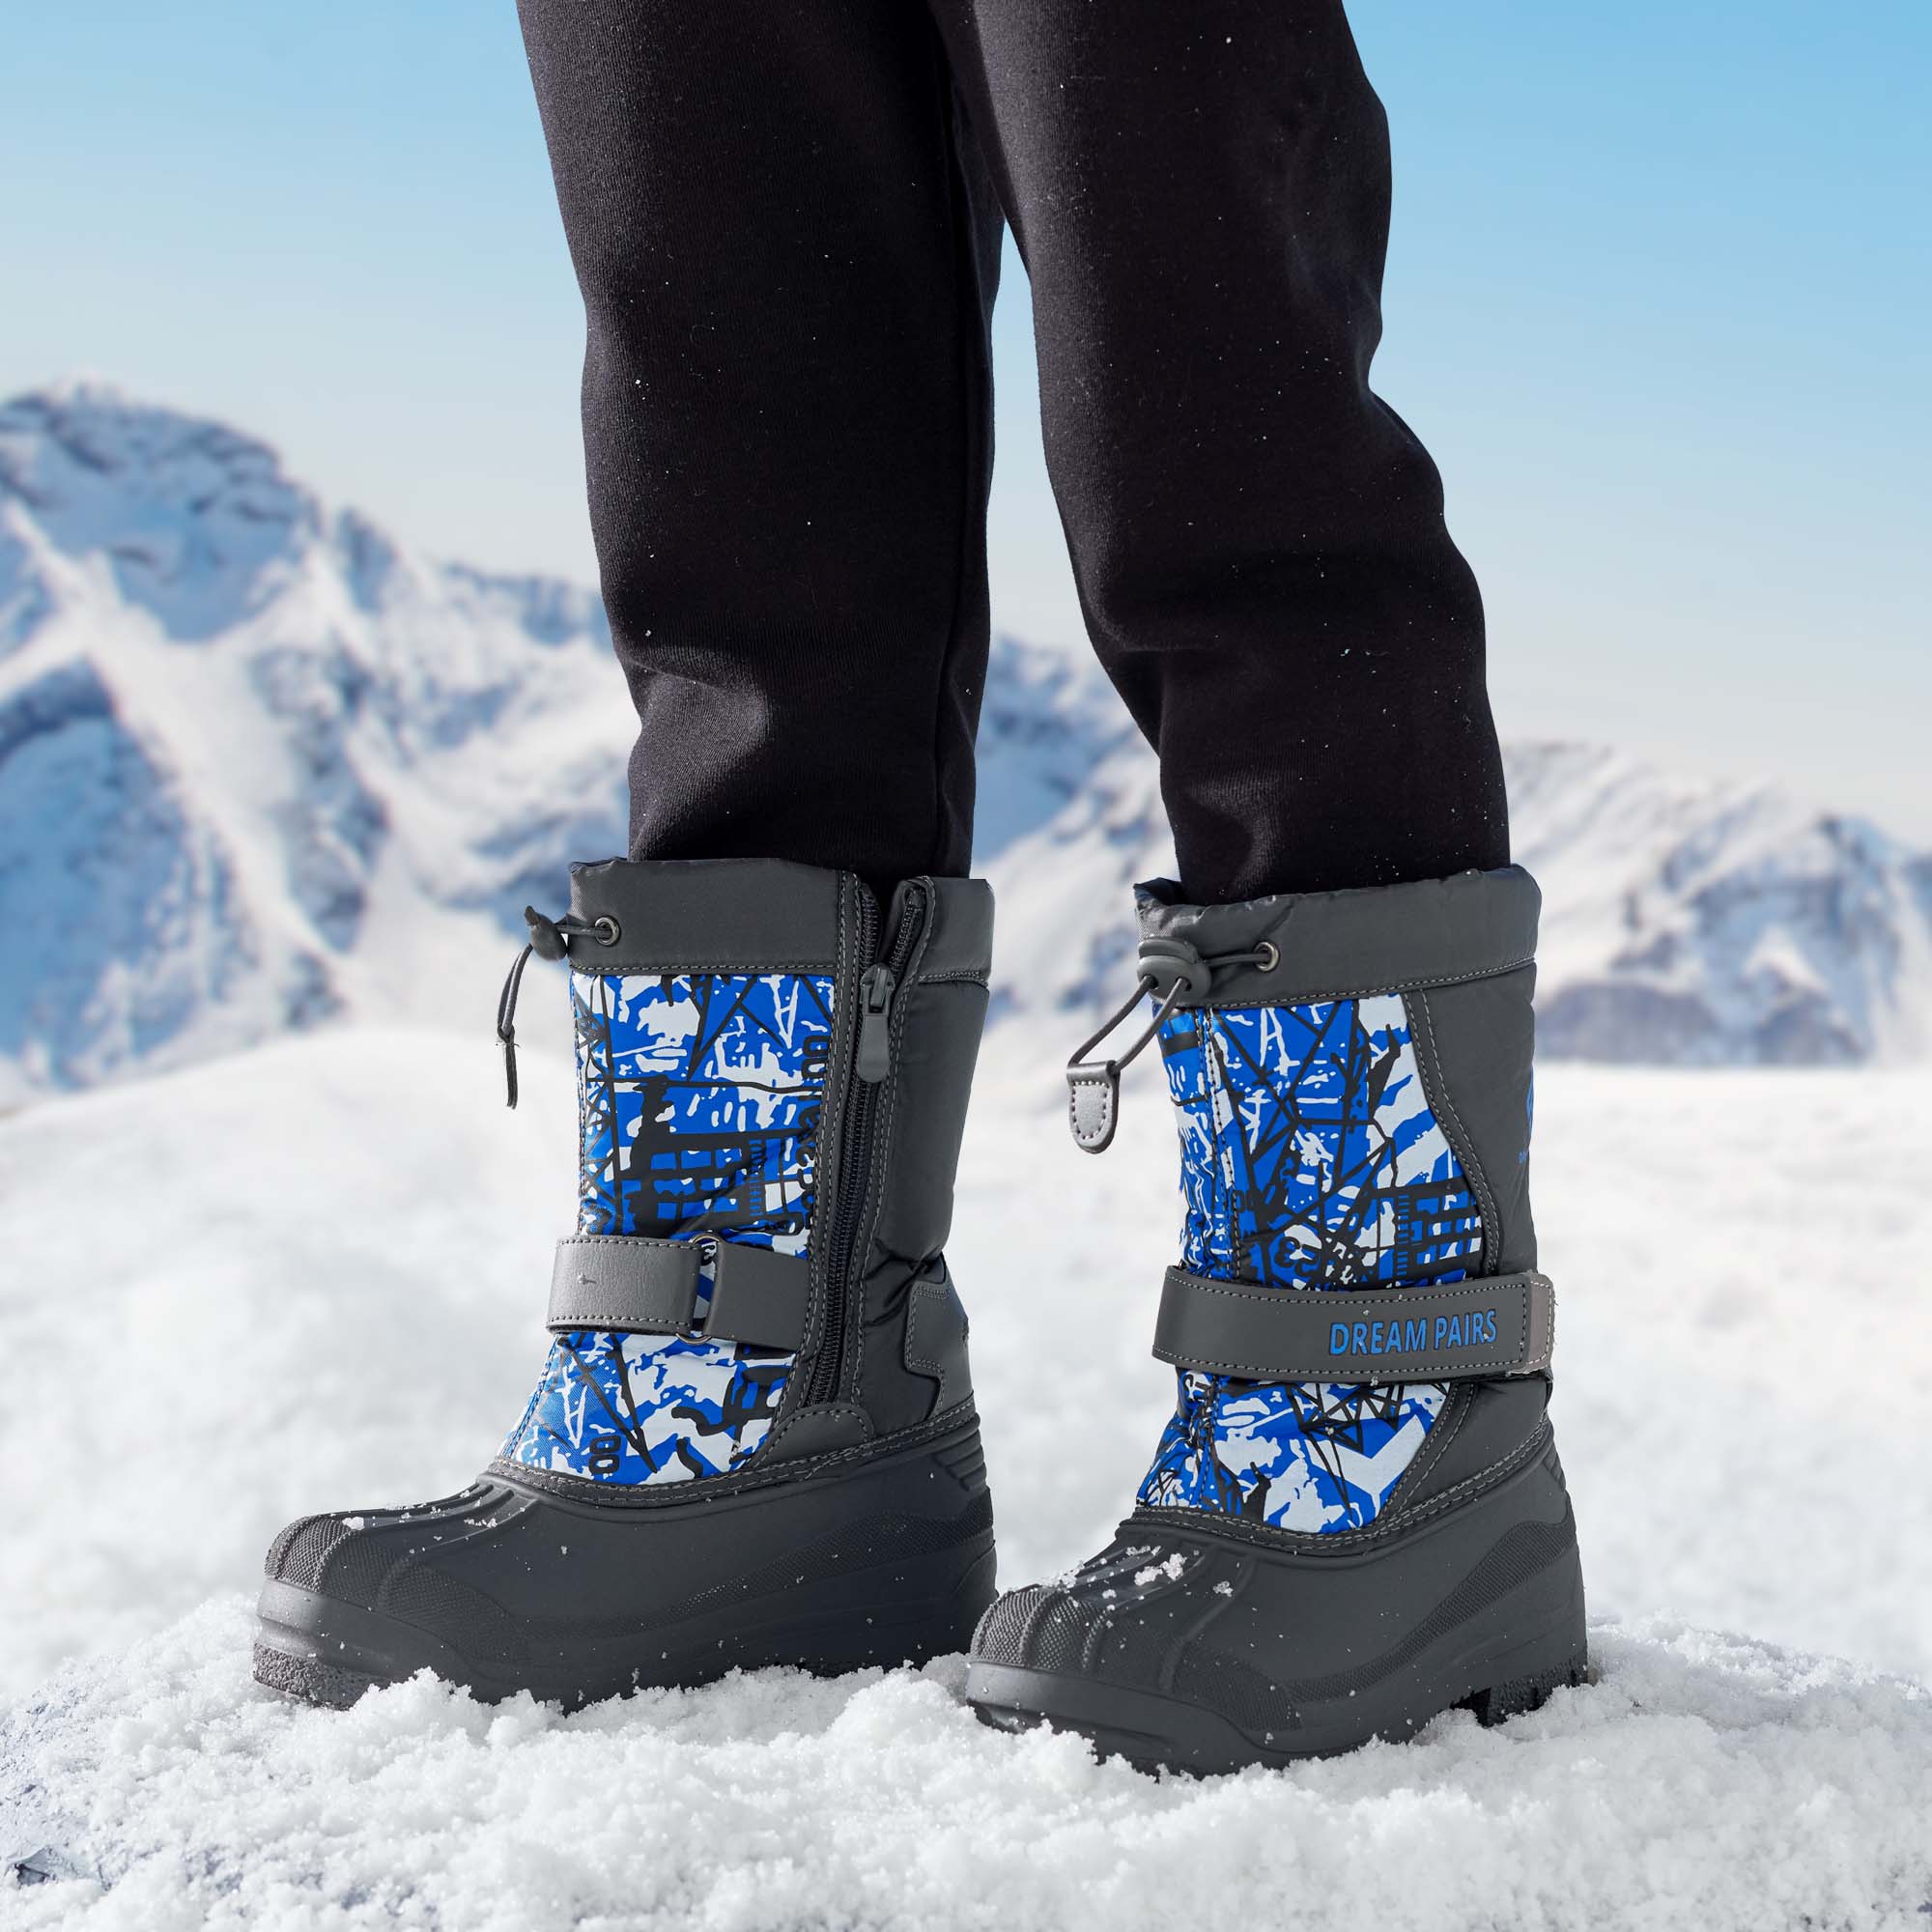 Dream Pairs Big Kid Boys & Girls Mid Calf Waterproof Winter Snow Boots KAMICK. color NAVY, size 1. - image 3 of 6